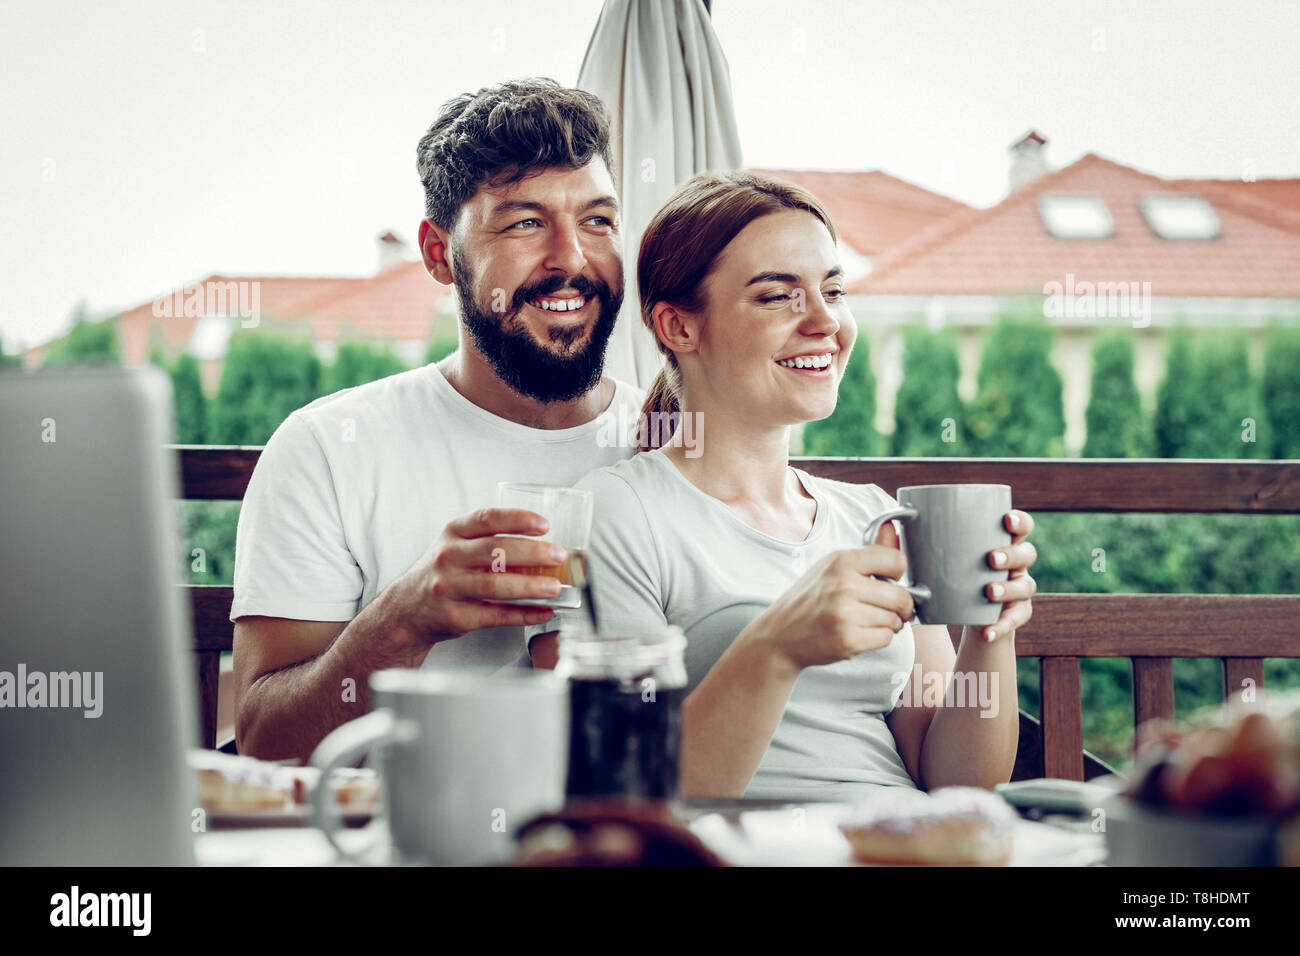 Happy husband embracing his spouse during breakfast in the garden. Stock Photo